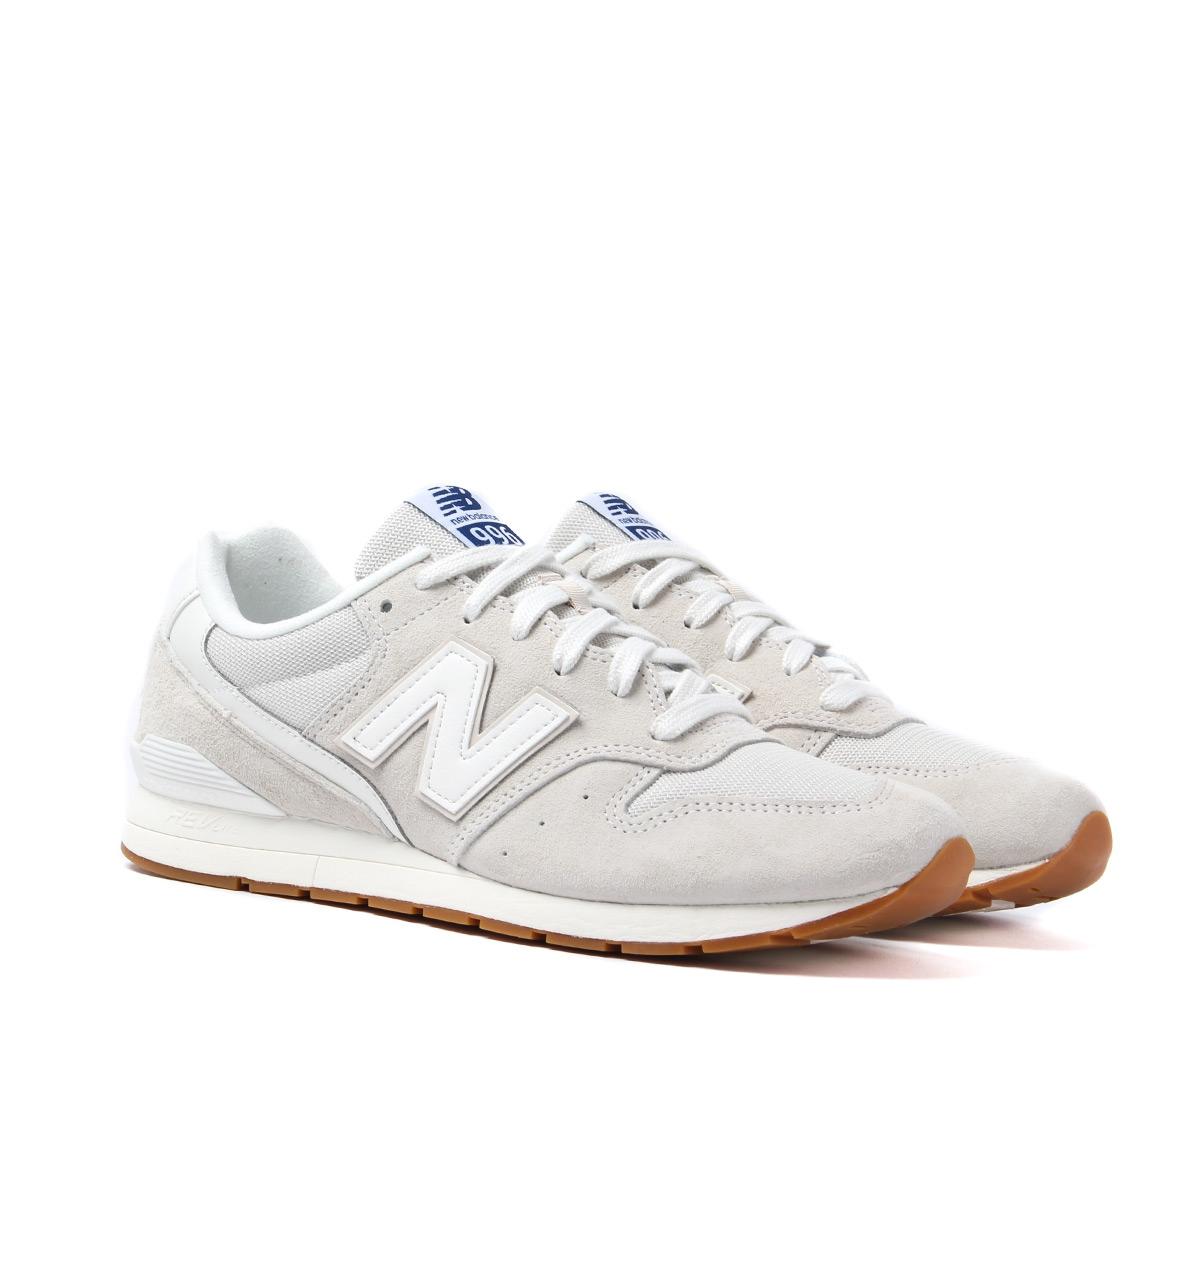 New Balance 996 Sea Salt Suede Trainers in White for Men - Lyst